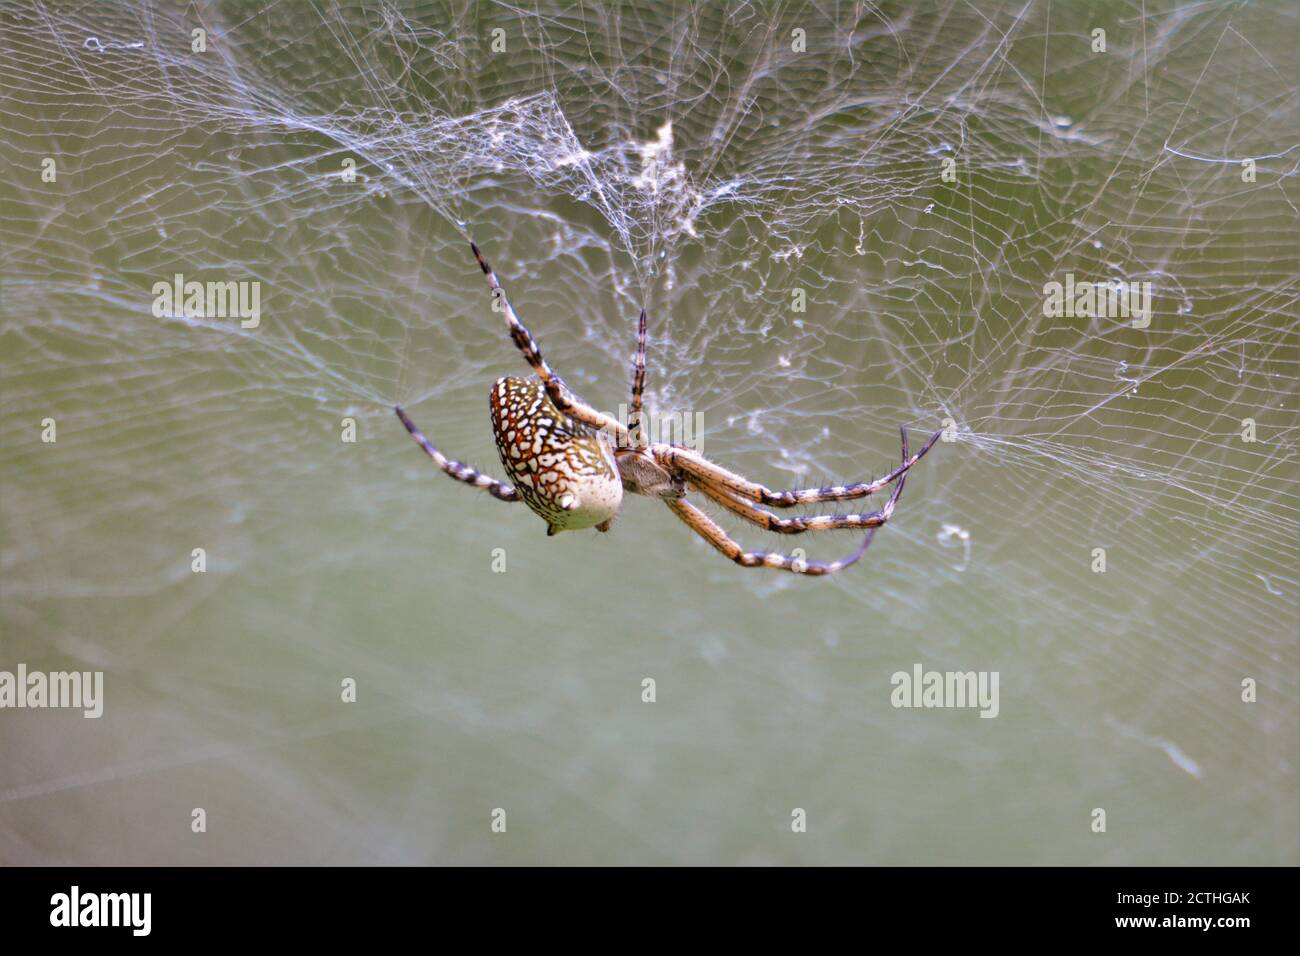 A big spider hanging on web Stock Photo